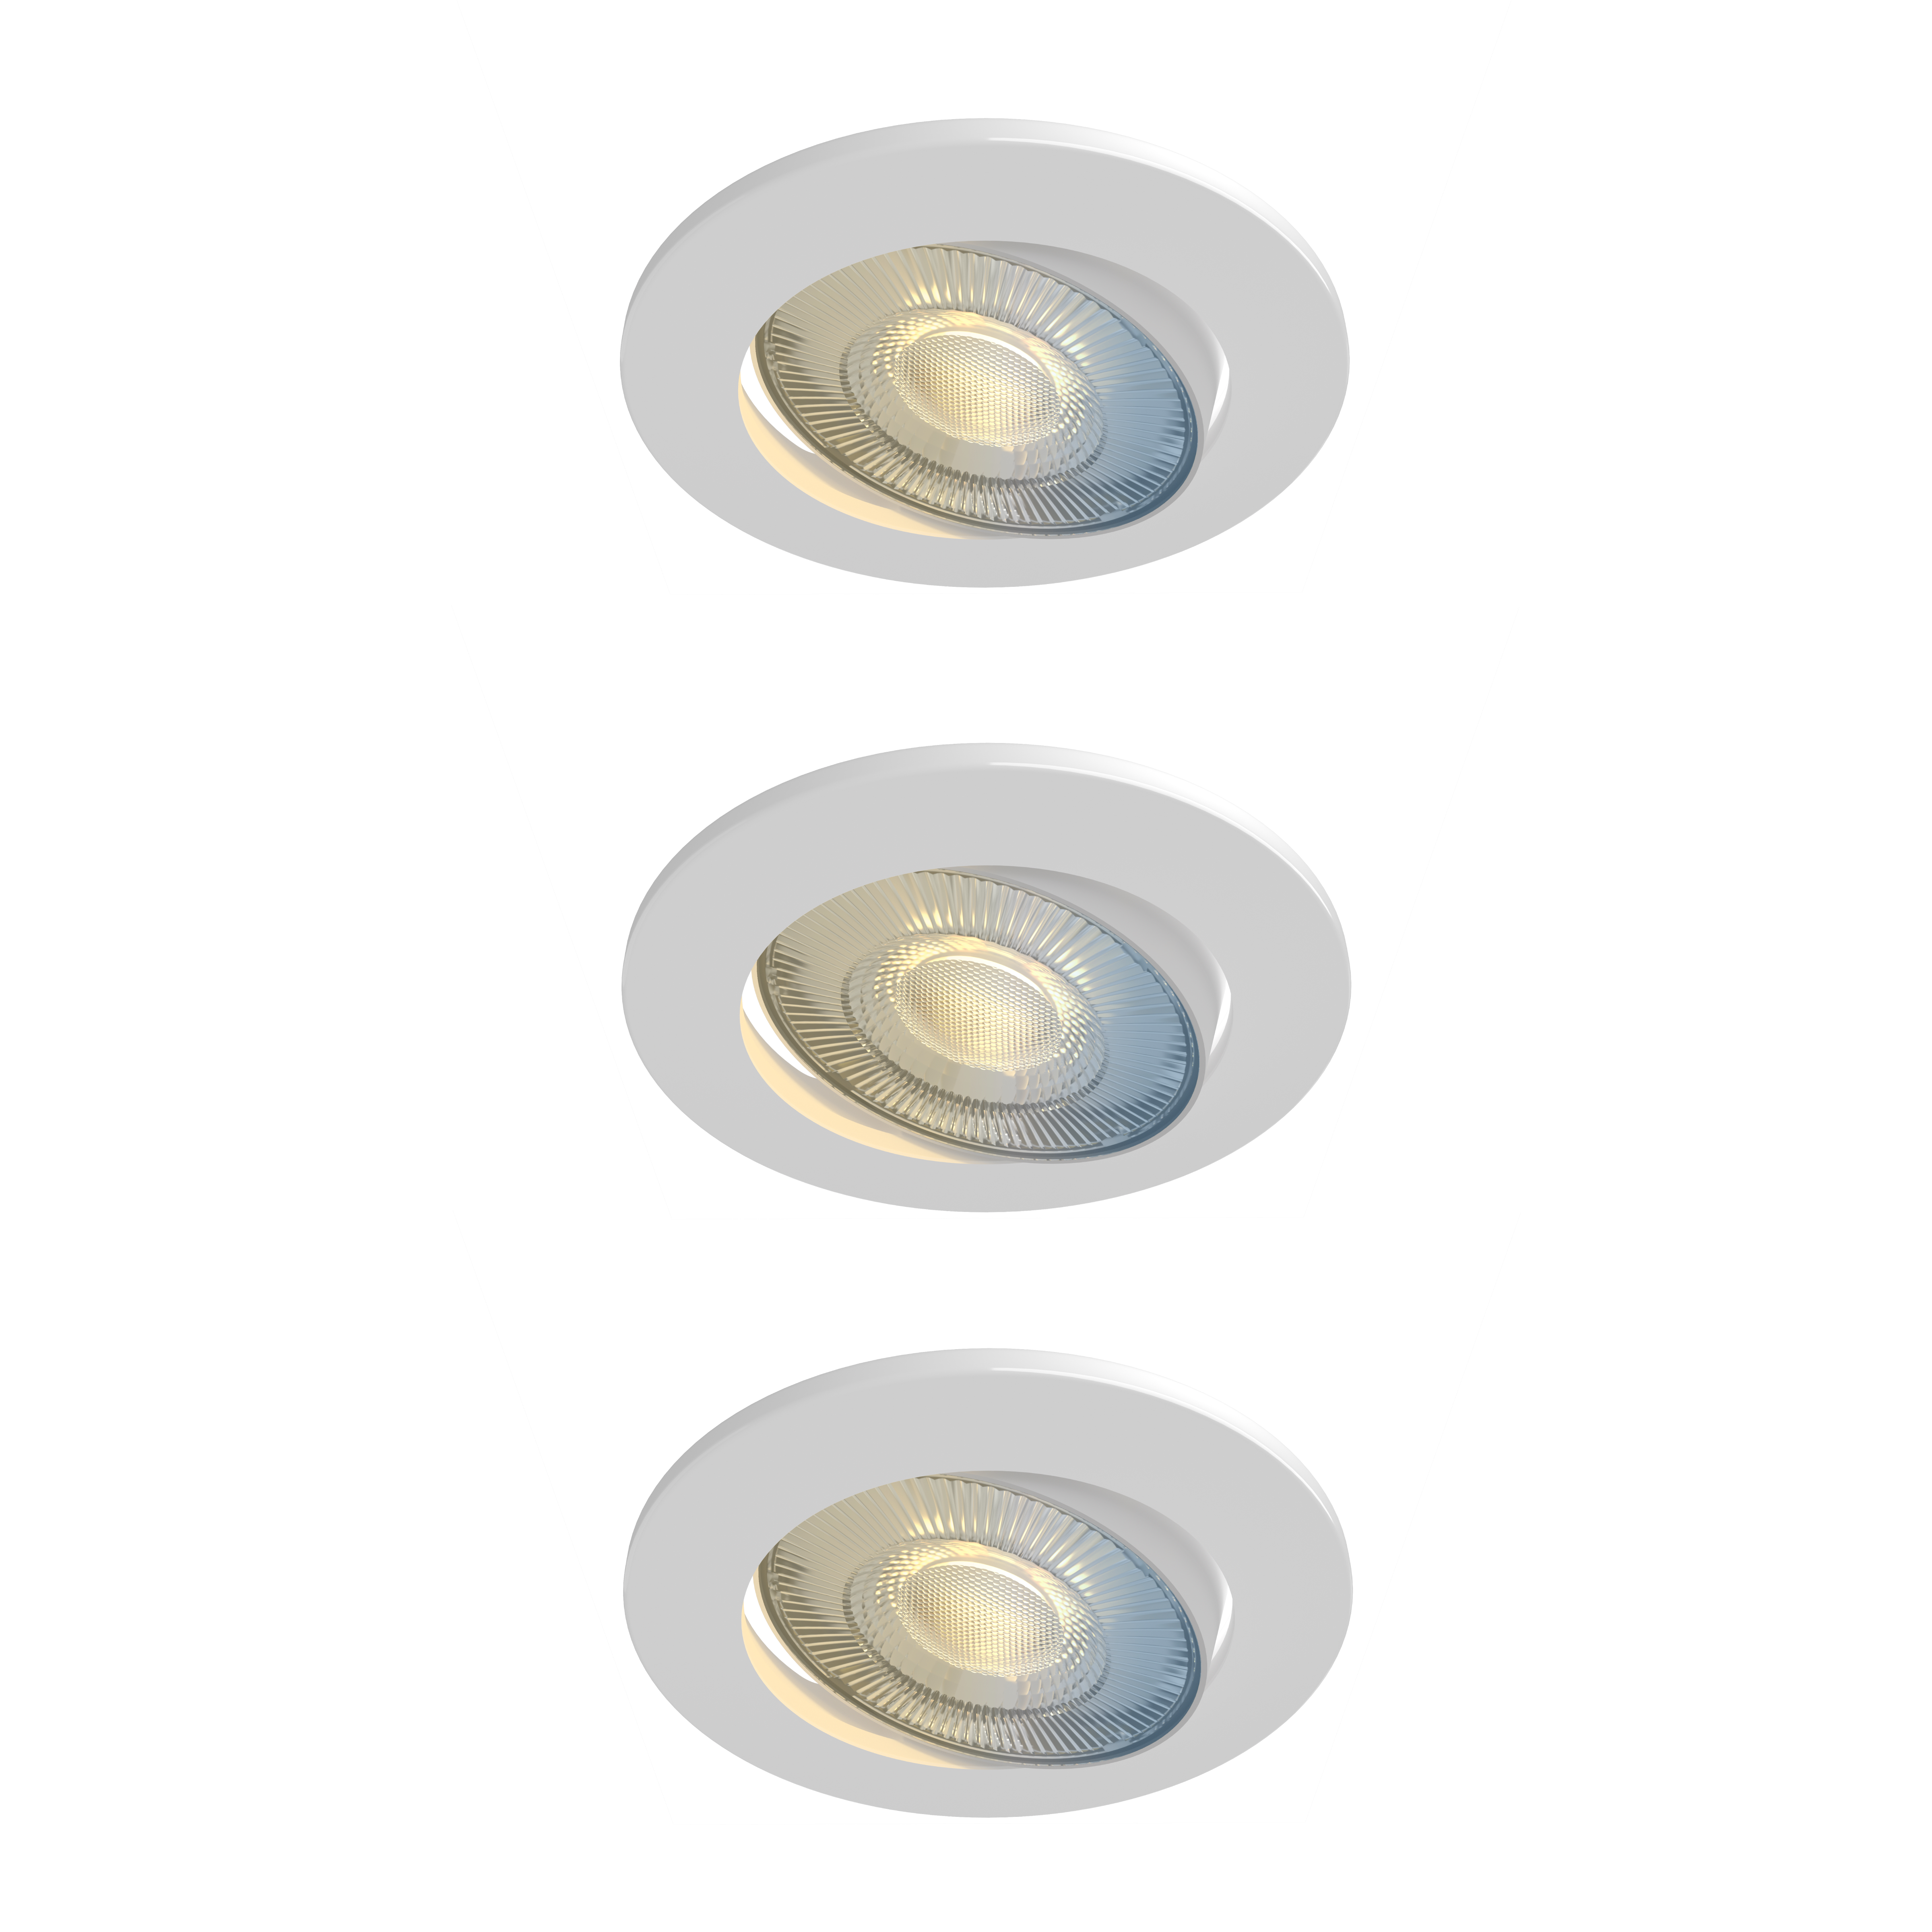 Image of Calex Smart 5W Adjustable White LED Downlight - Pack of 3